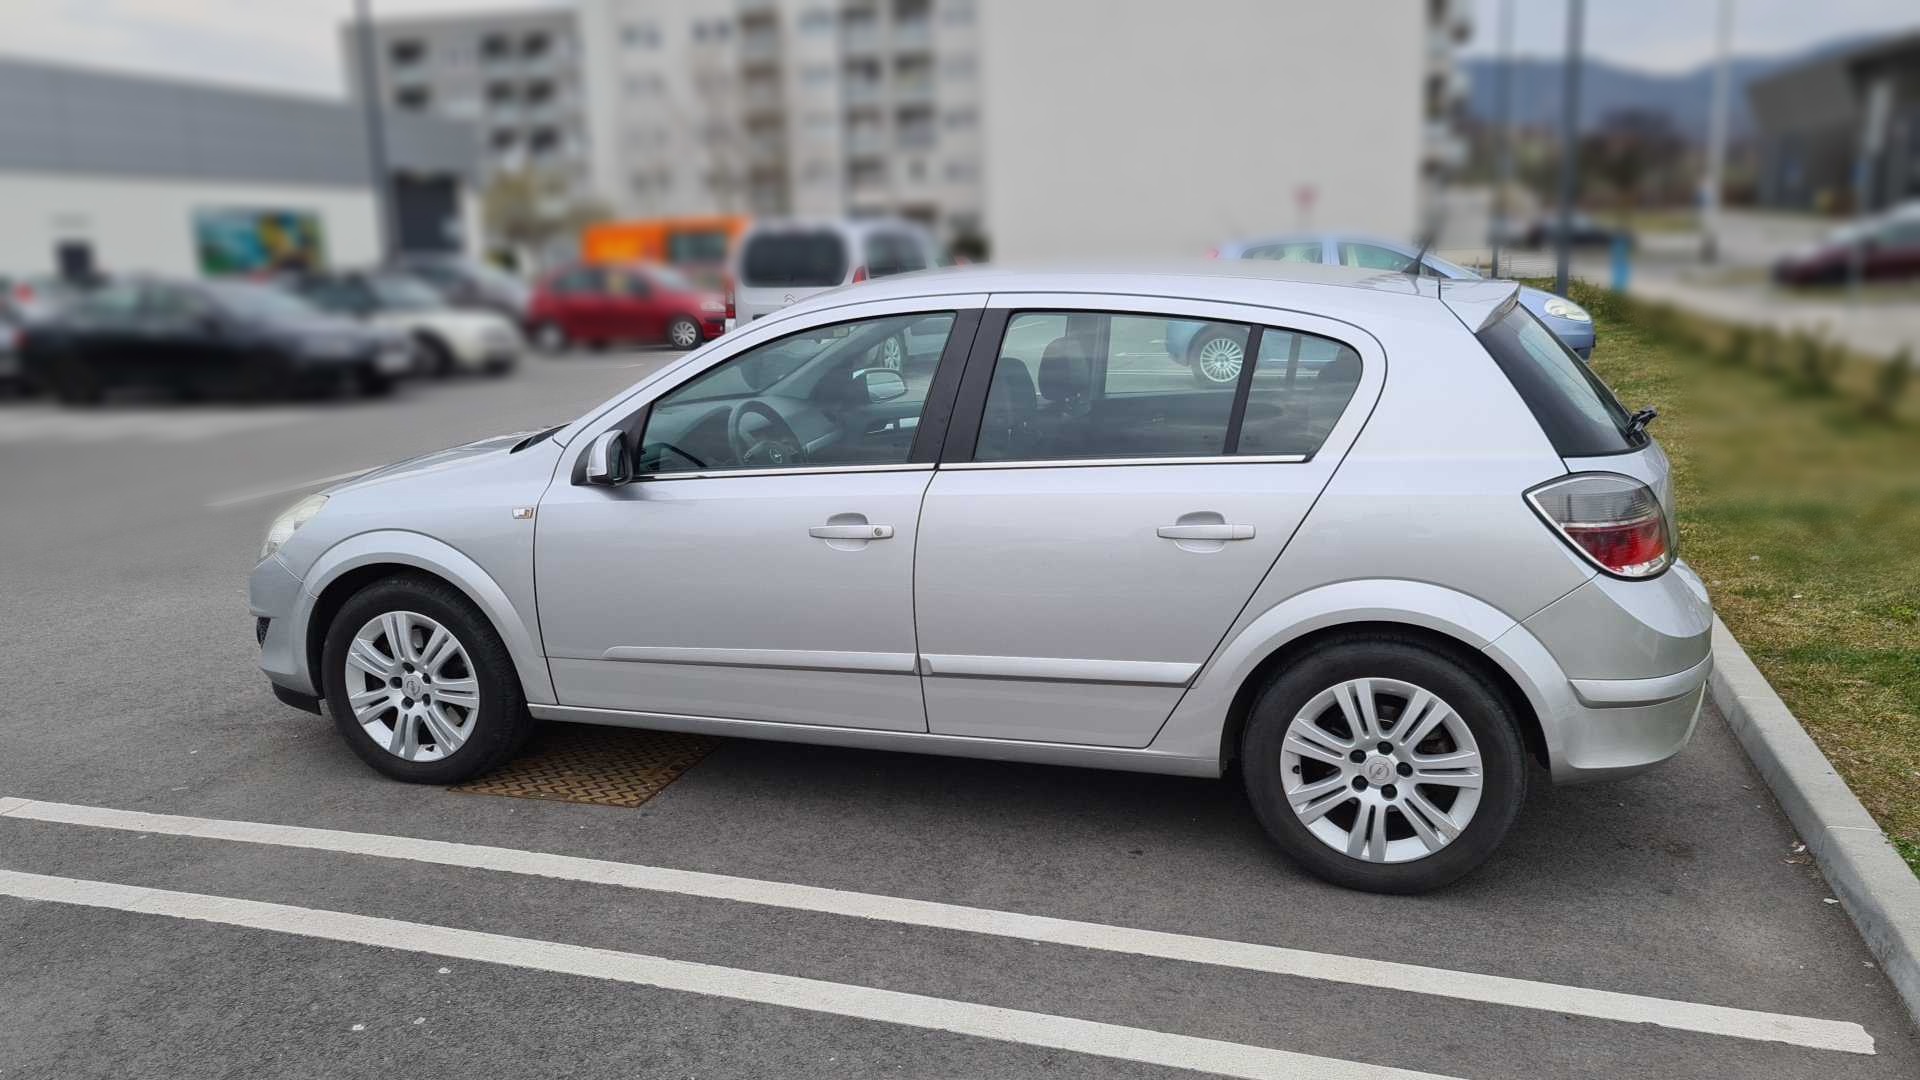 Opel ASTRA H 1.7CDTI COSMO 210,596 km 4.539,<sup class=currency-decimal>69</ sup> €, opel astra h